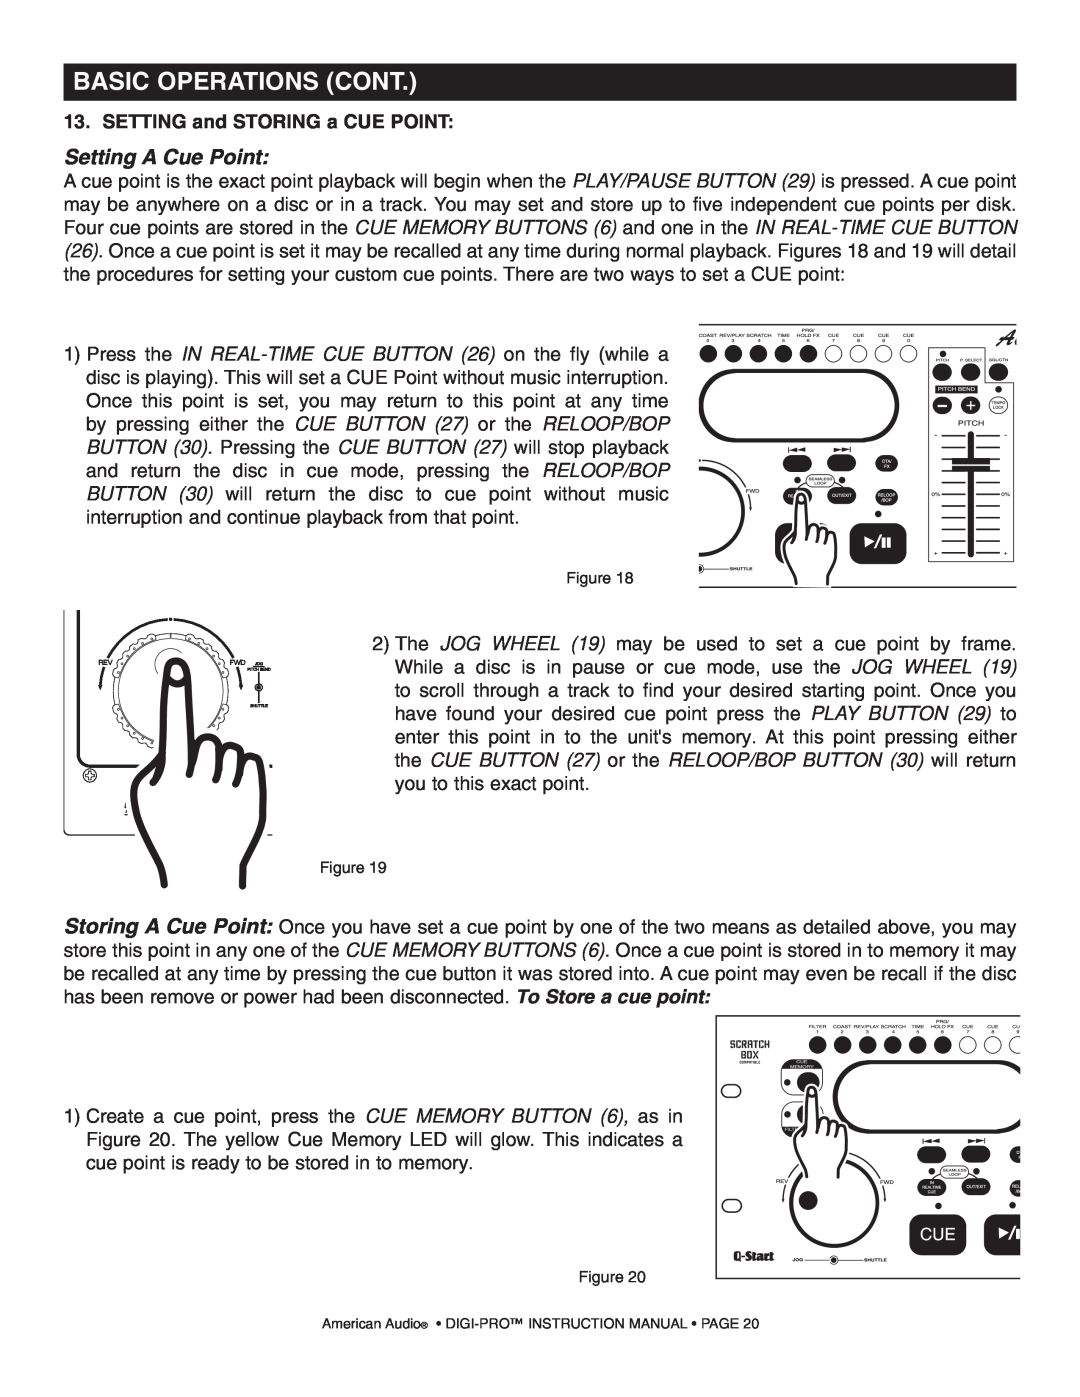 American Audio DIGI-PRO operating instructions Setting A Cue Point, Basic Operations Cont, SETTING and STORING a CUE POINT 